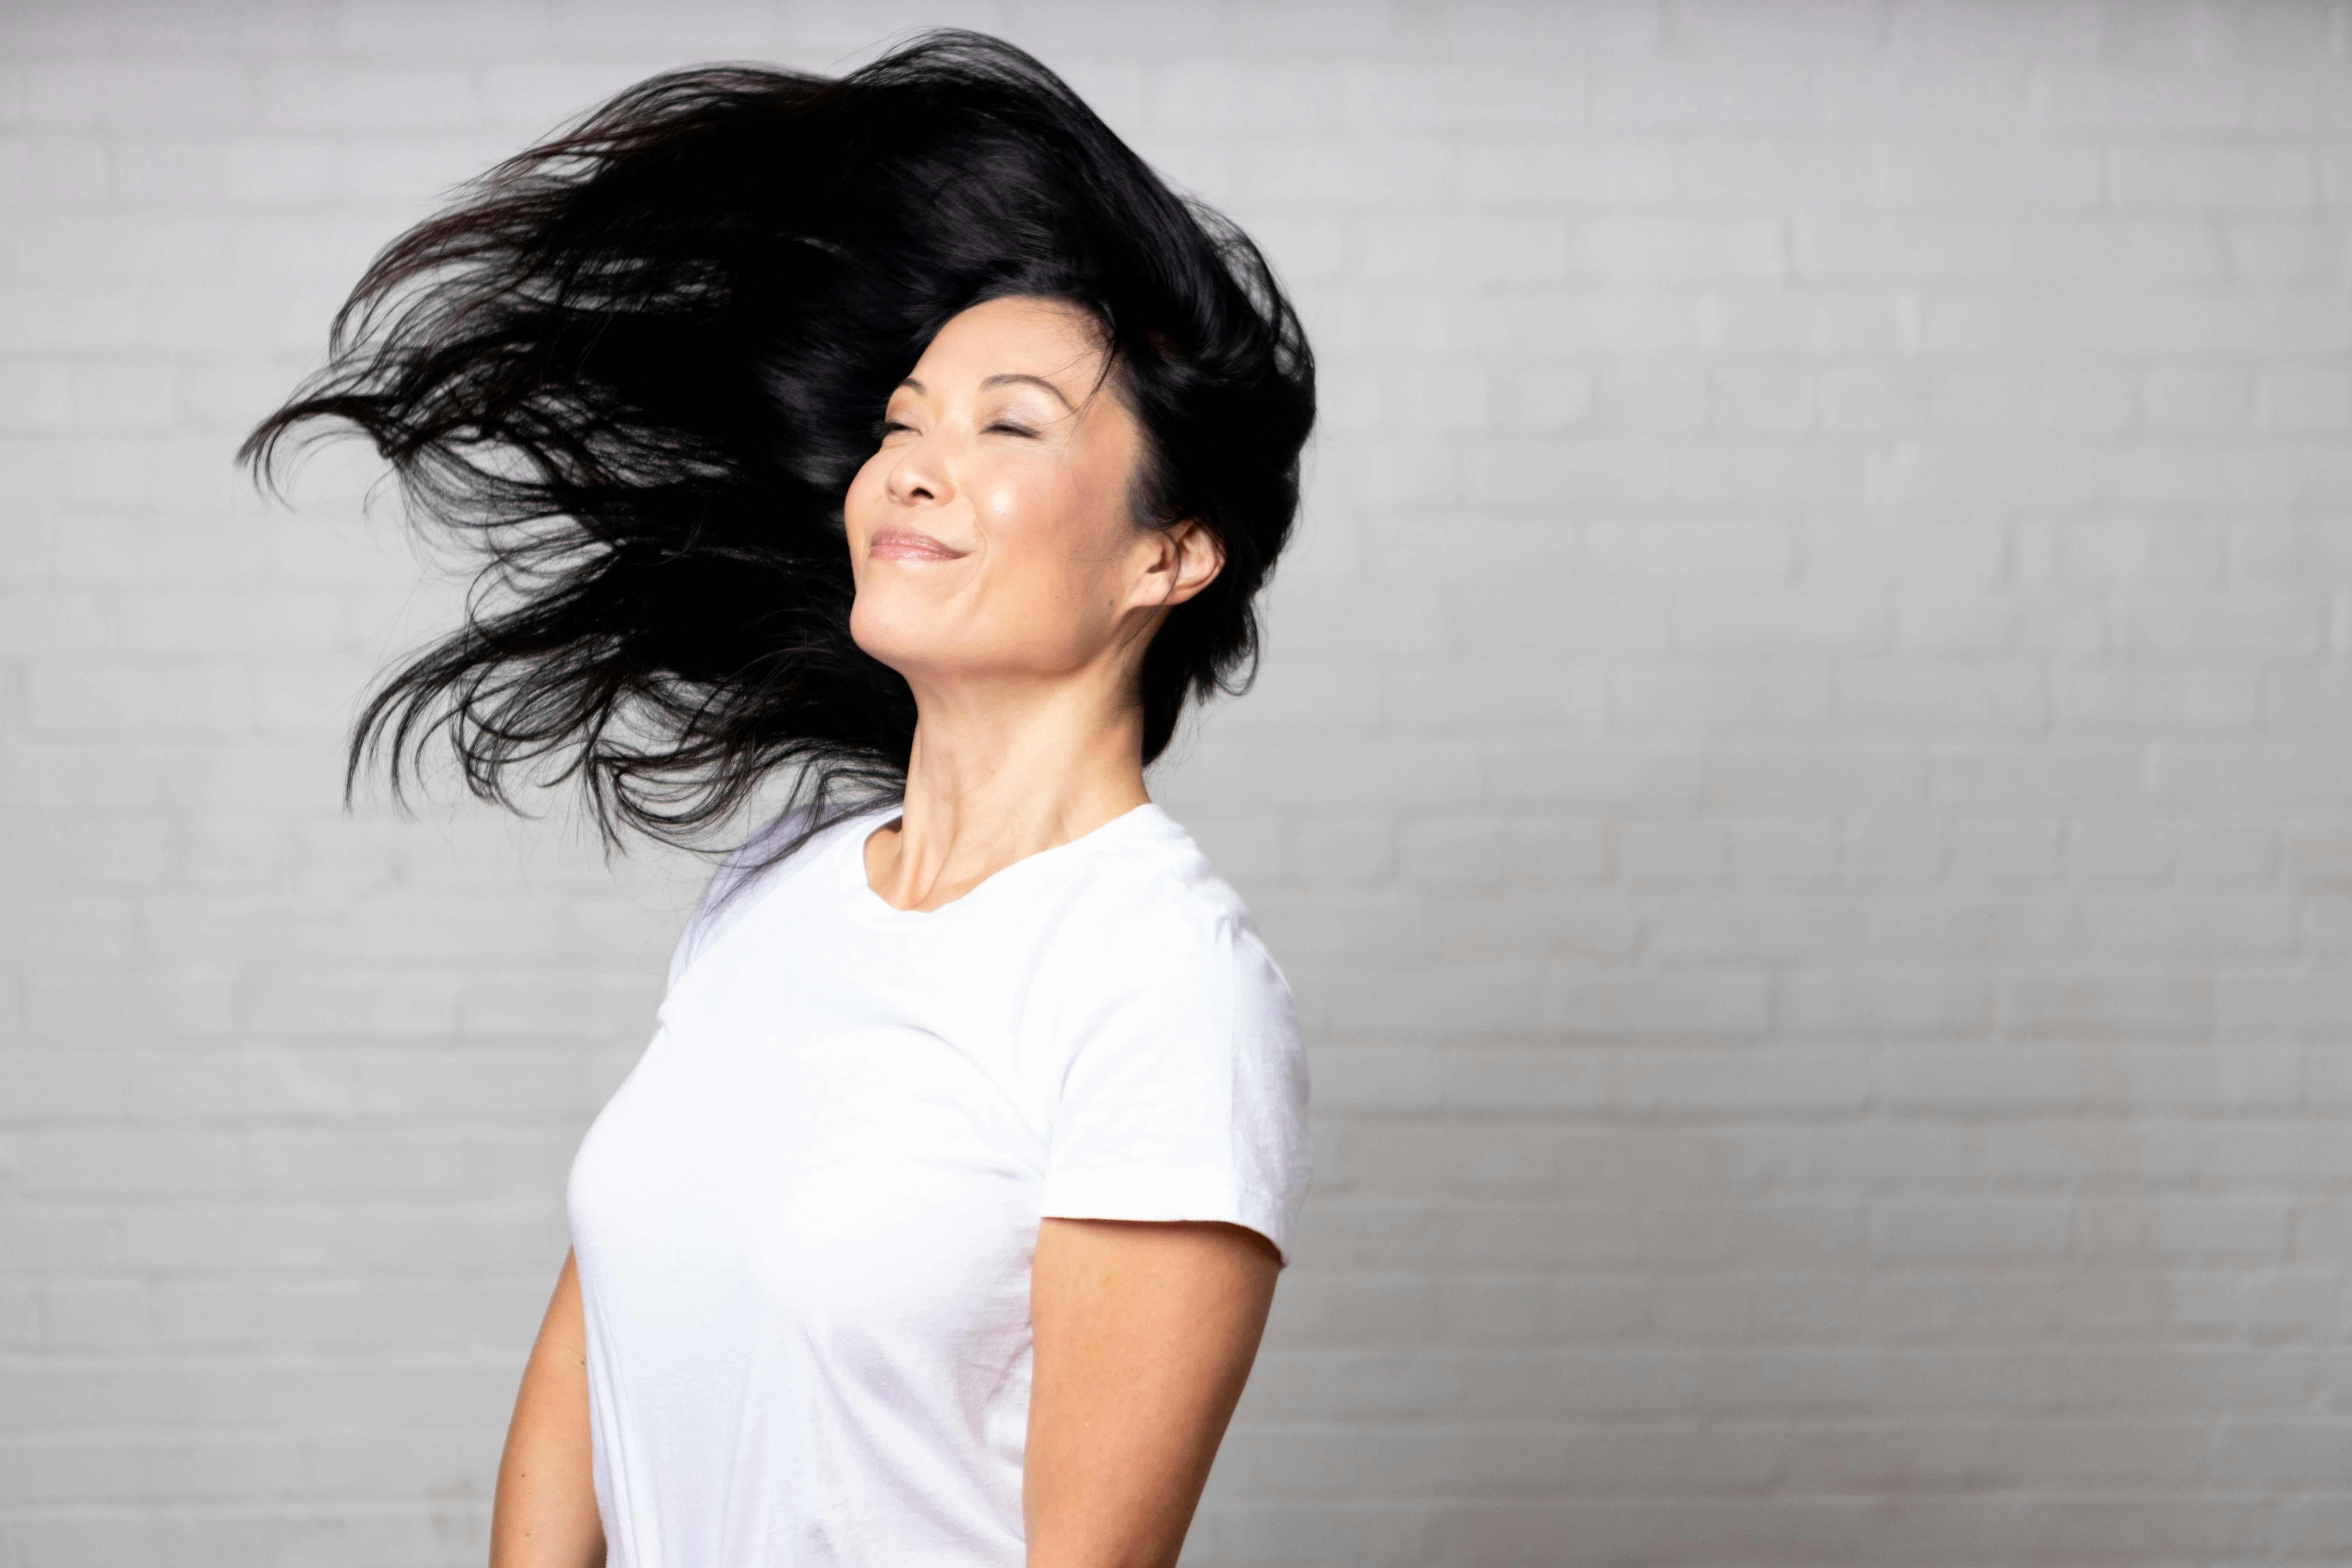 Smiling woman with hair blowing